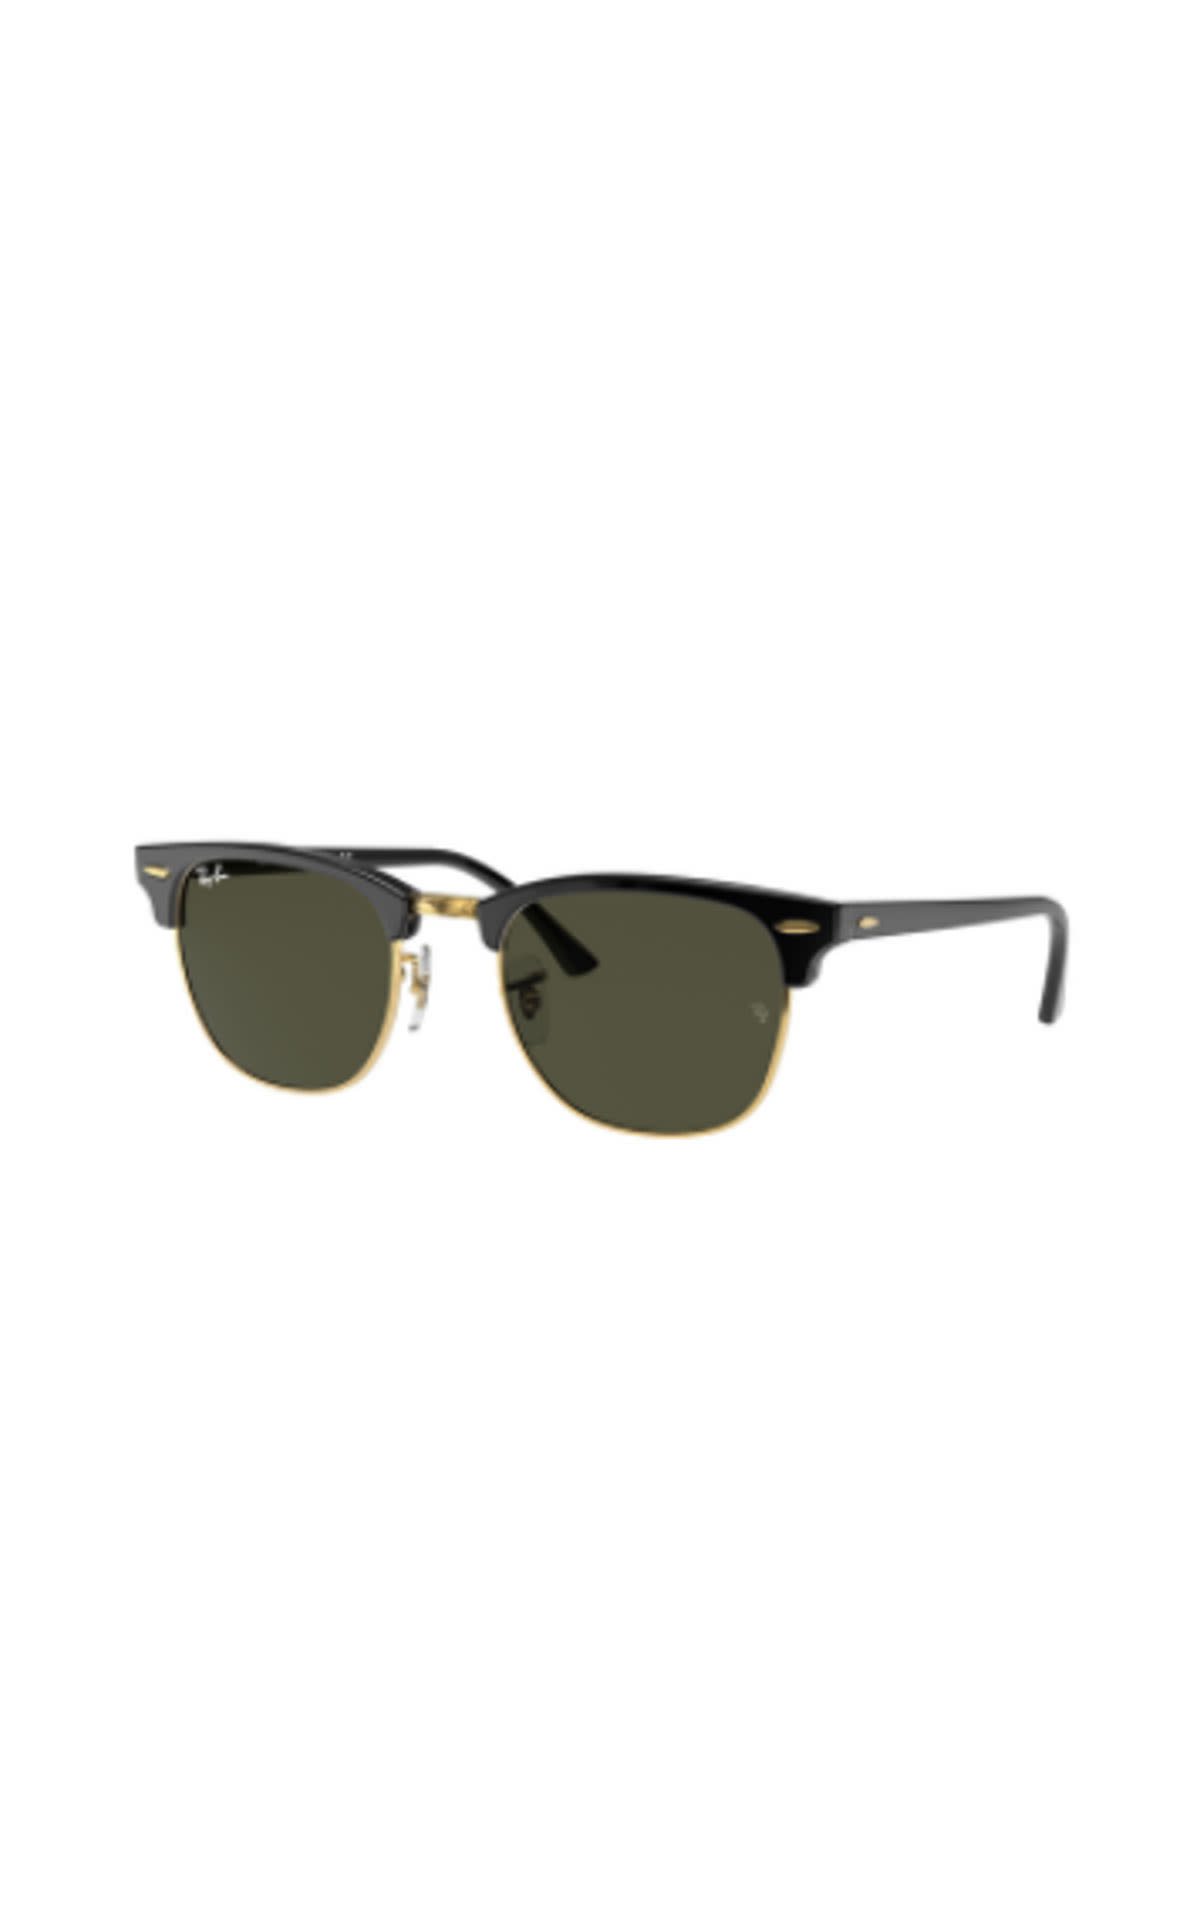 David Clulow Ray-Ban RB3016 51 from Bicester Village